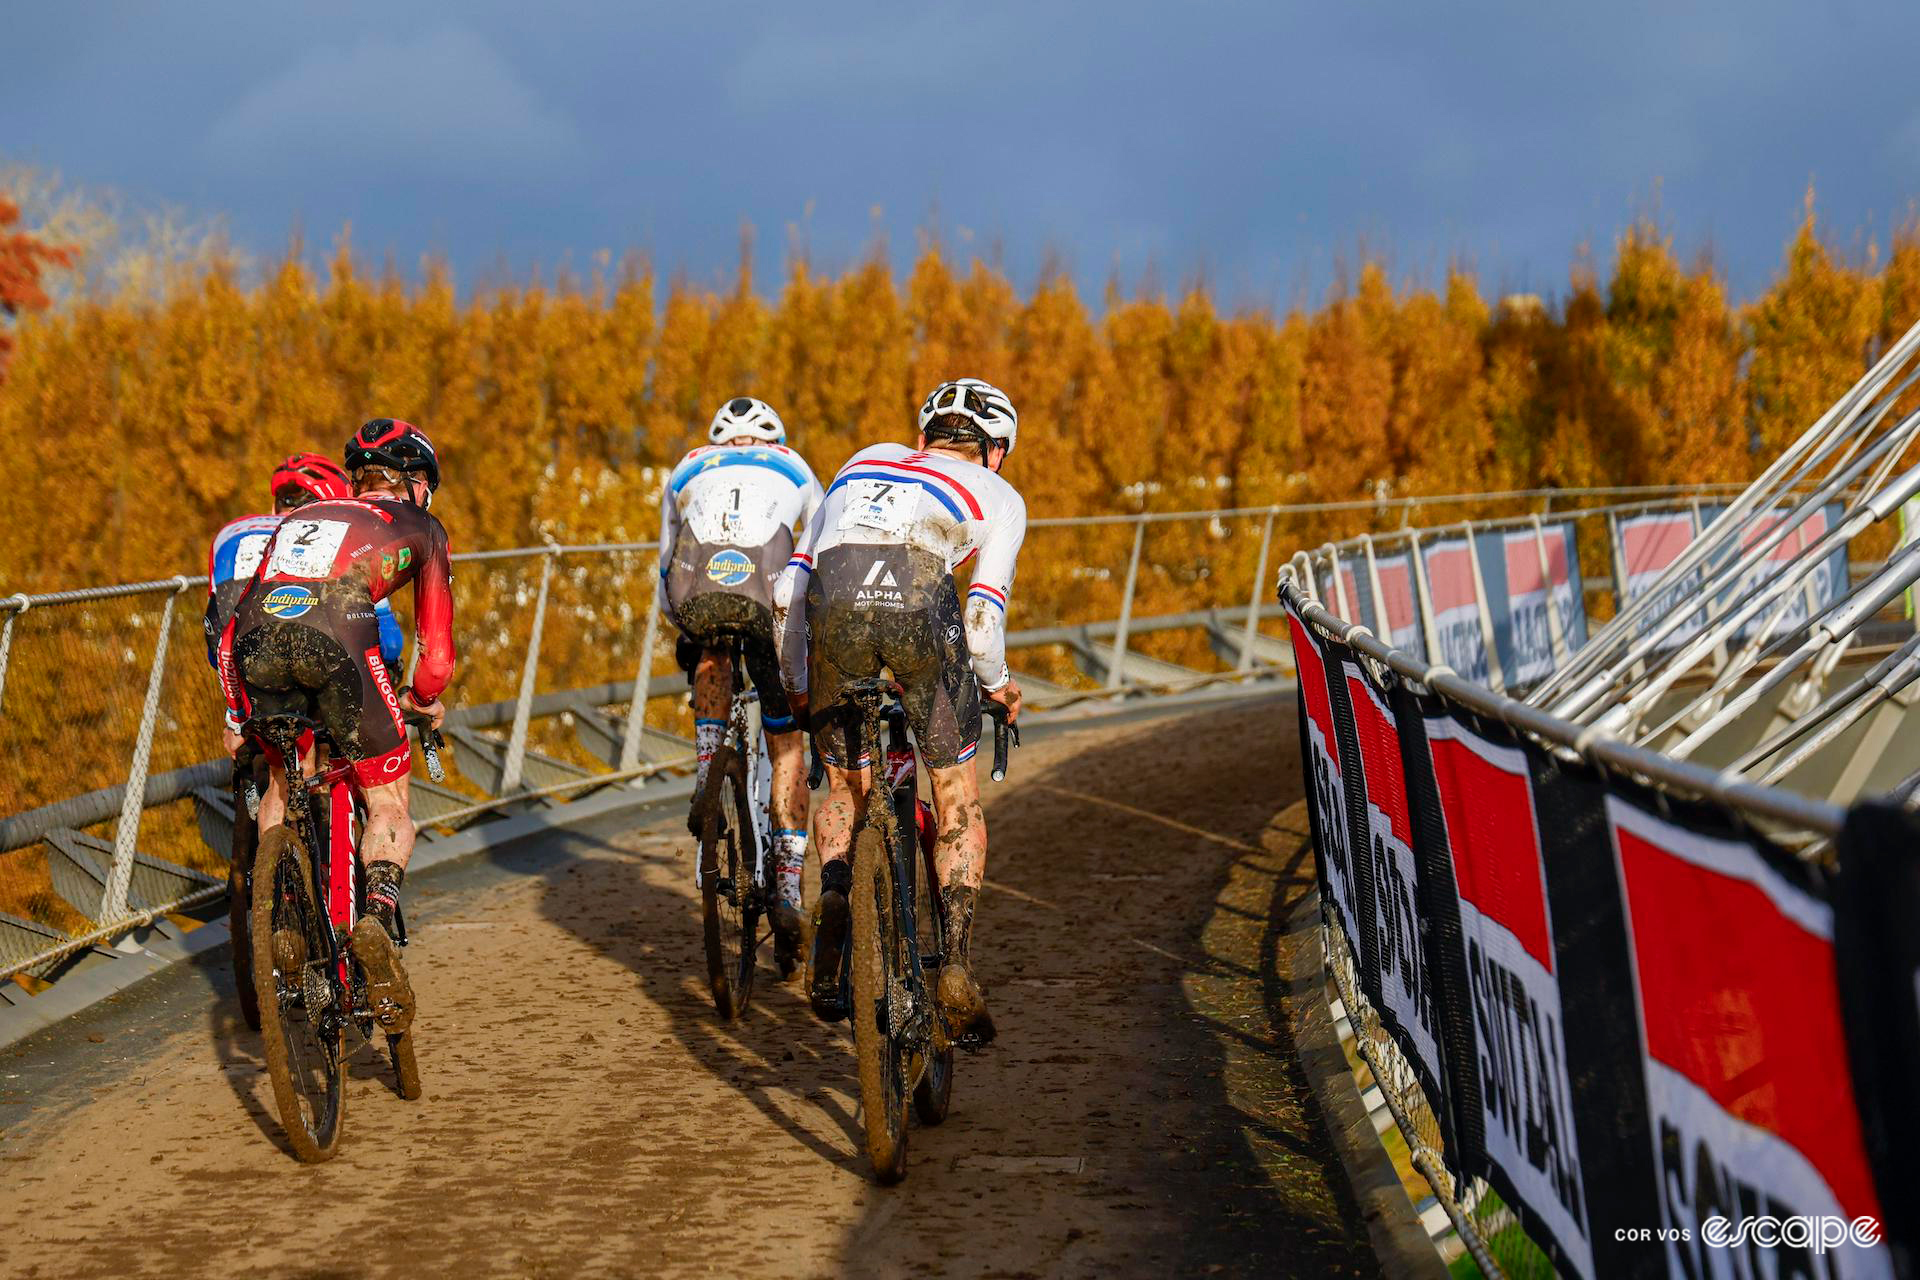 The four leaders of the men's cyclocross X20 Trofee Kortrijk seen from behind as they ride onto a muddy flyover as a group, lit up late in the day against an autumnal backdrop.